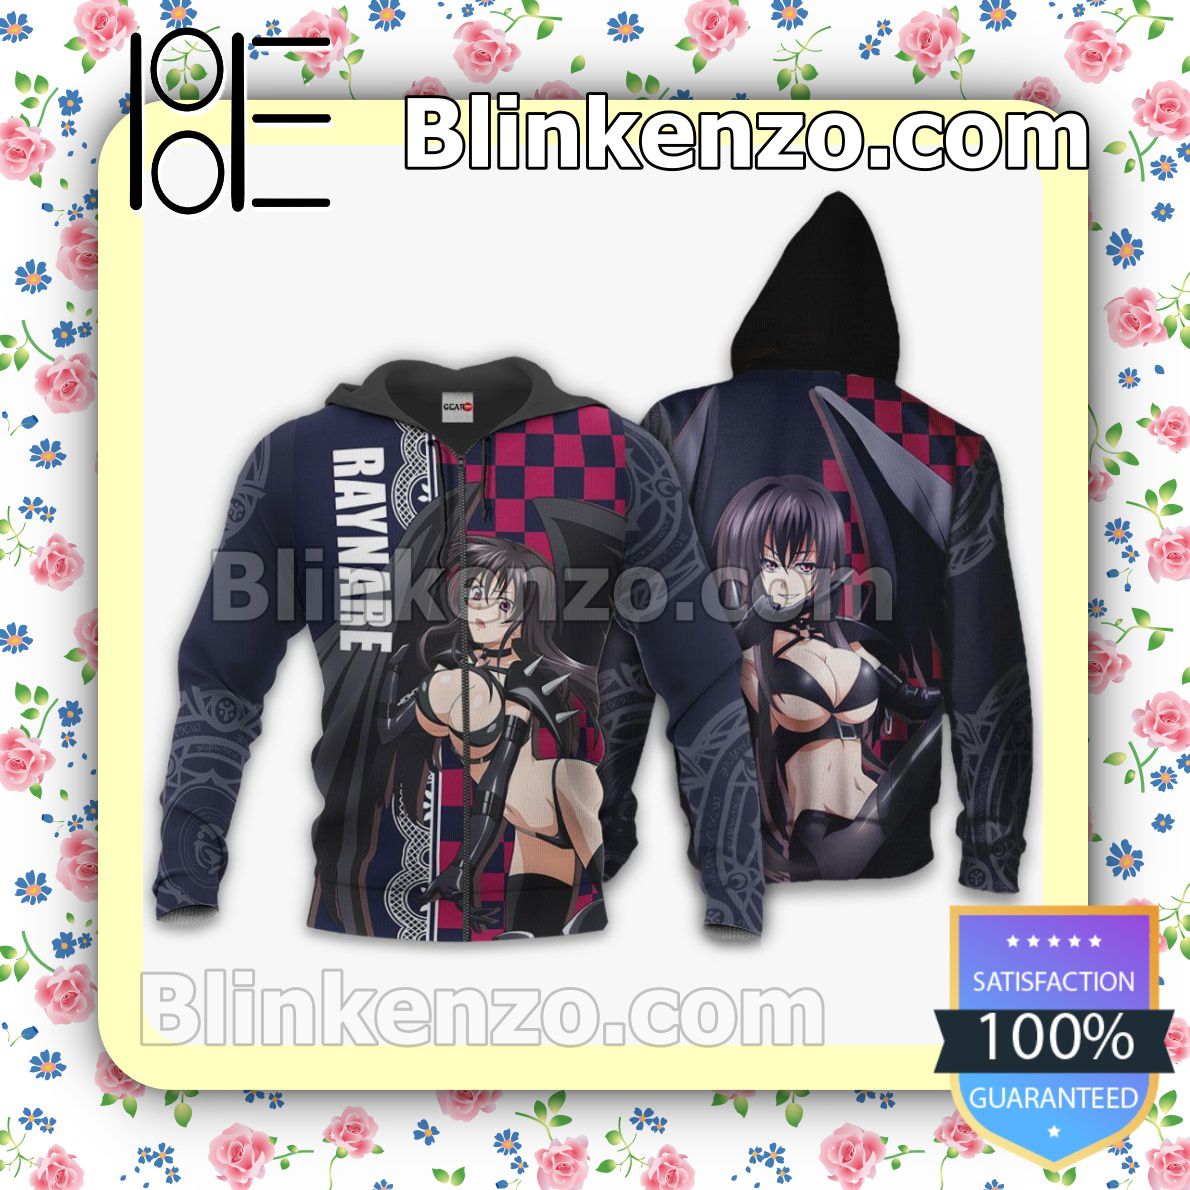 High School DXD Raynare Anime High School DxD Personalized T-shirt, Hoodie, Long Sleeve, Bomber Jacket